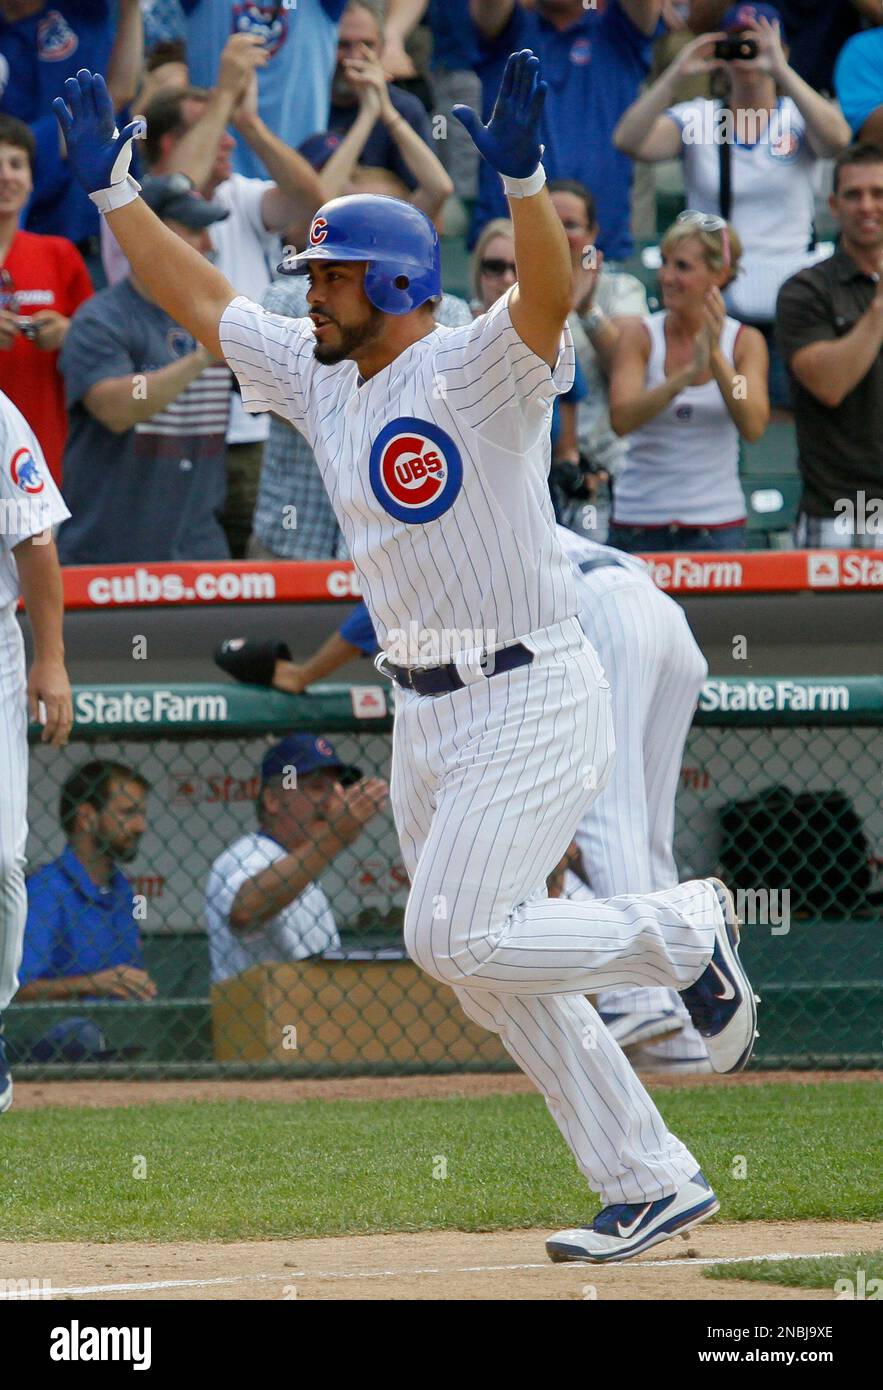 Ramirez comes through in pinch for Cubs win over Giants